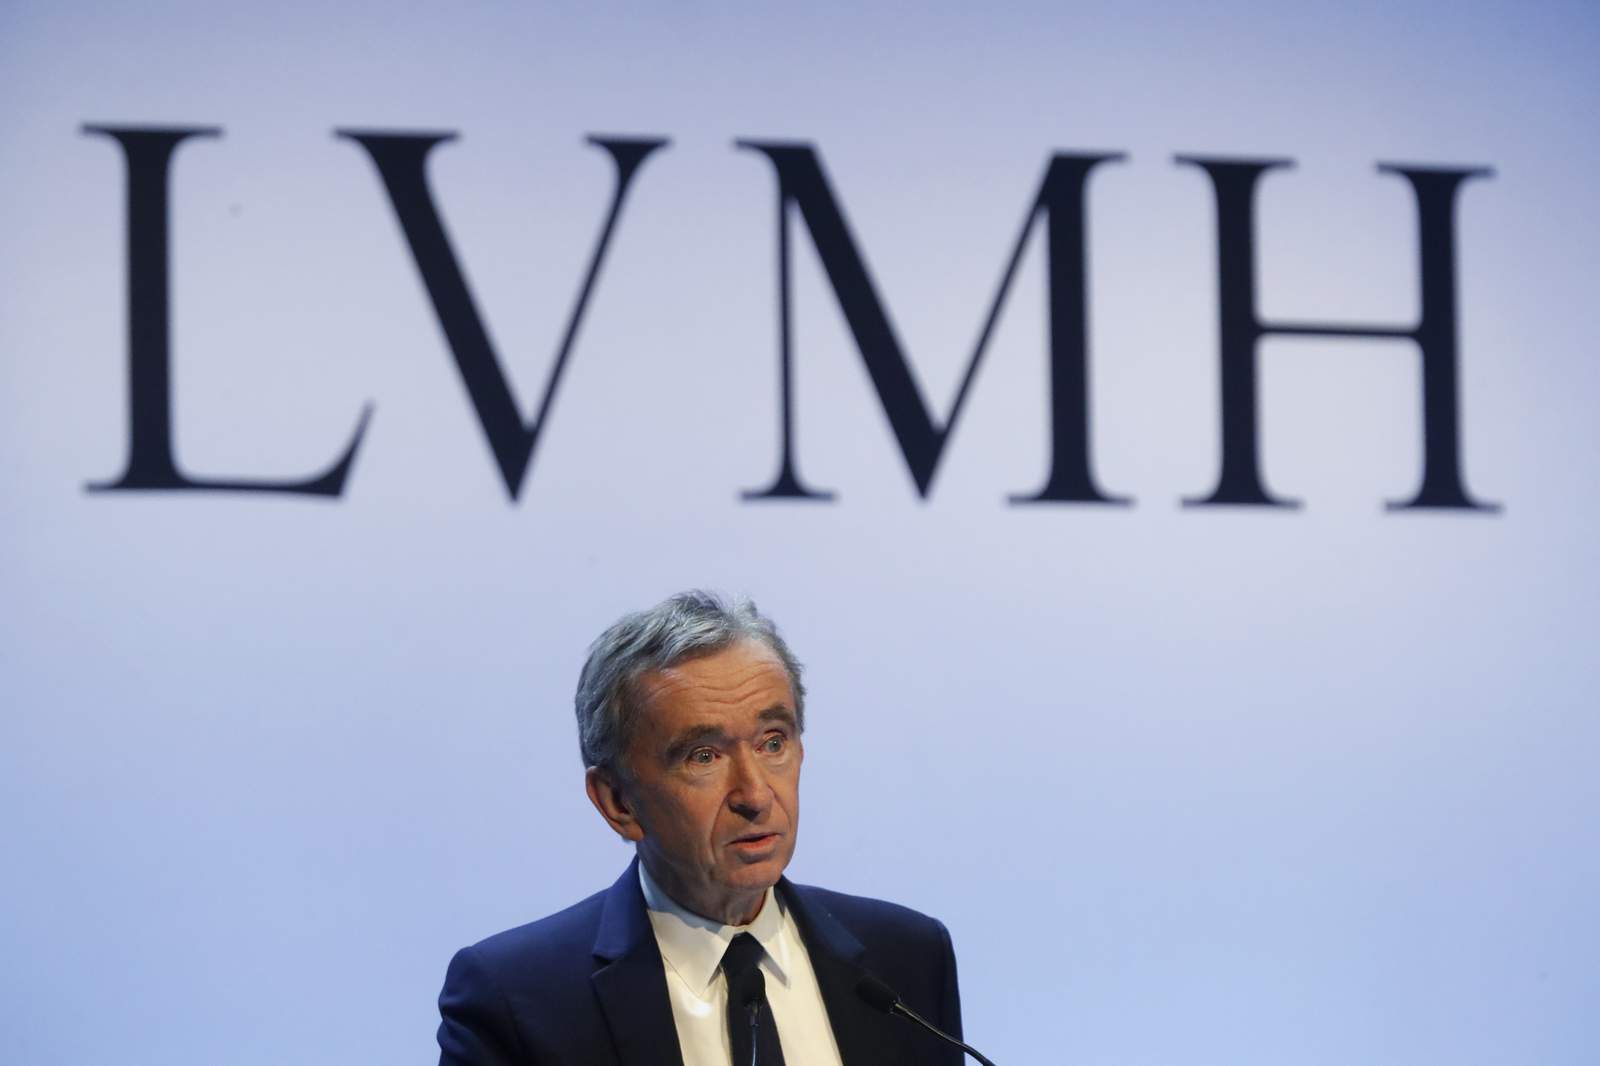 Dueling over diamonds: LVMH says Tiffany not worth buyout